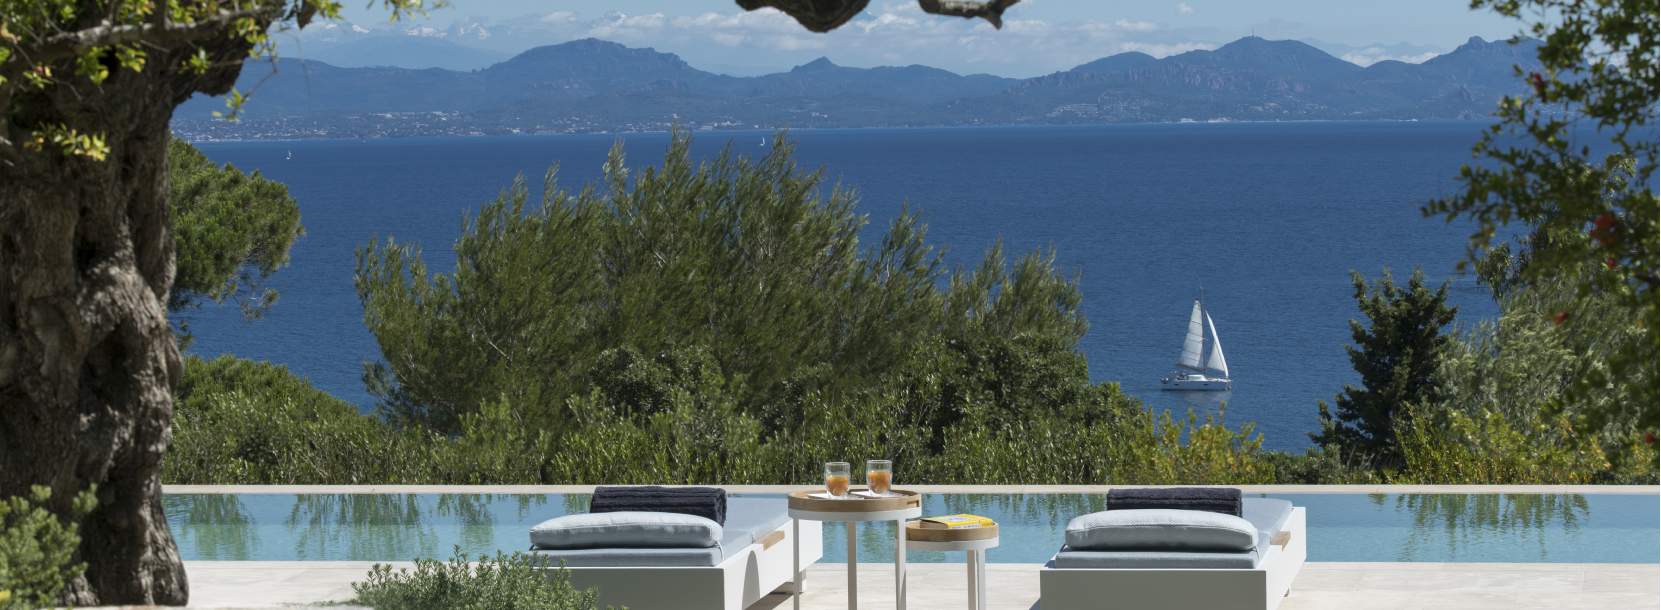  Top rental villas in the French Riviera - Summer 2022